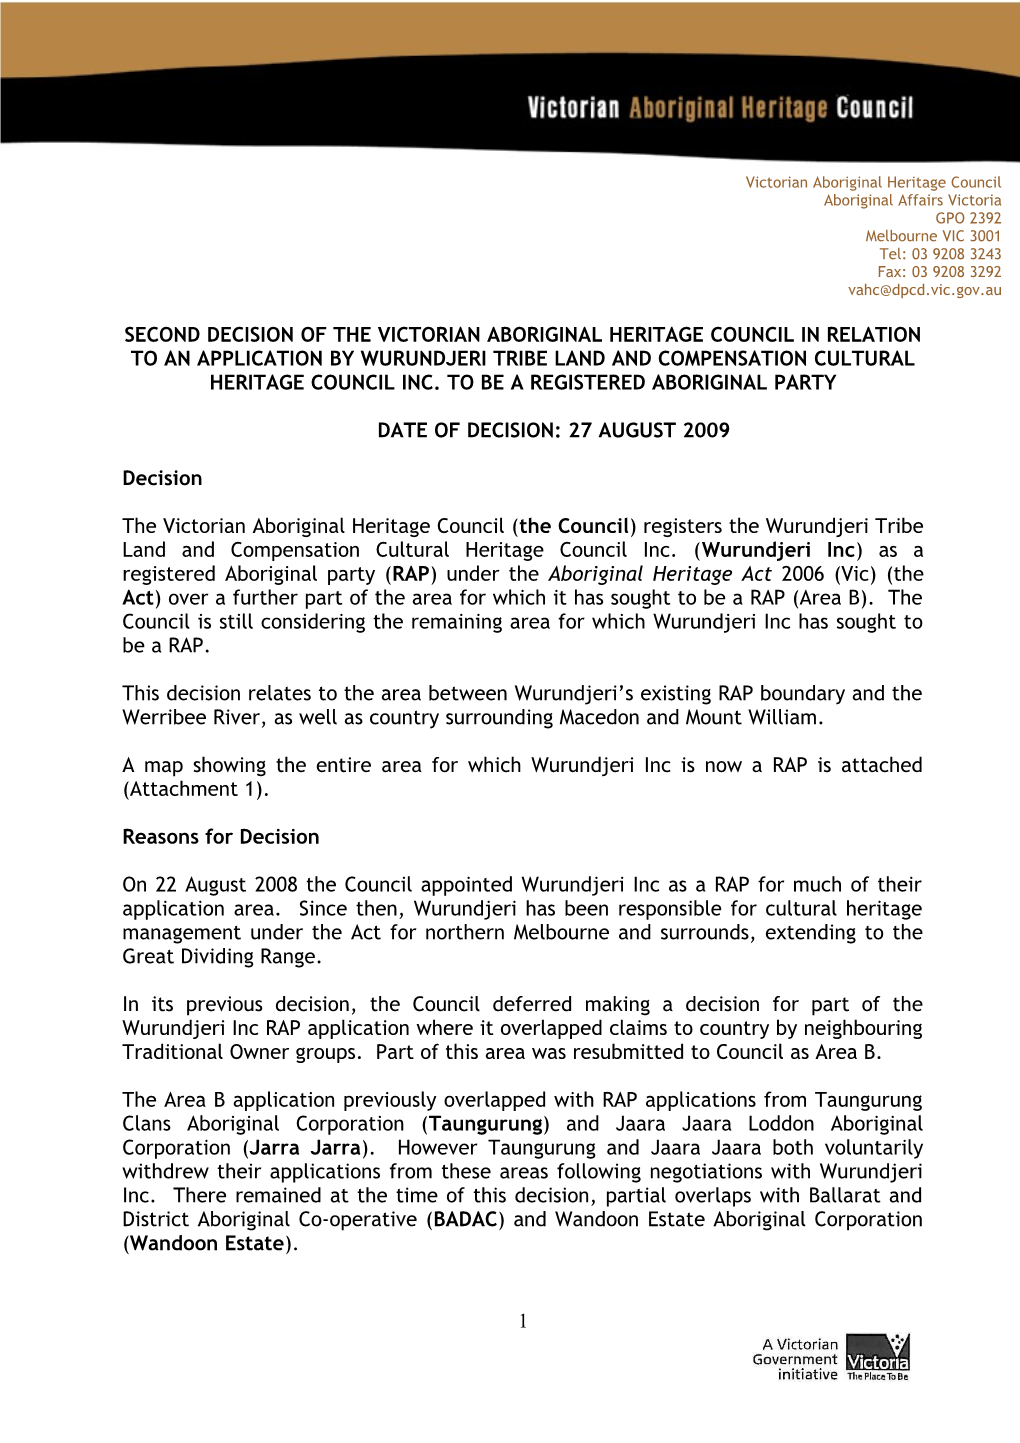 Seconddecision of the Victorian Aboriginal Heritage Council in Relation to Anapplication